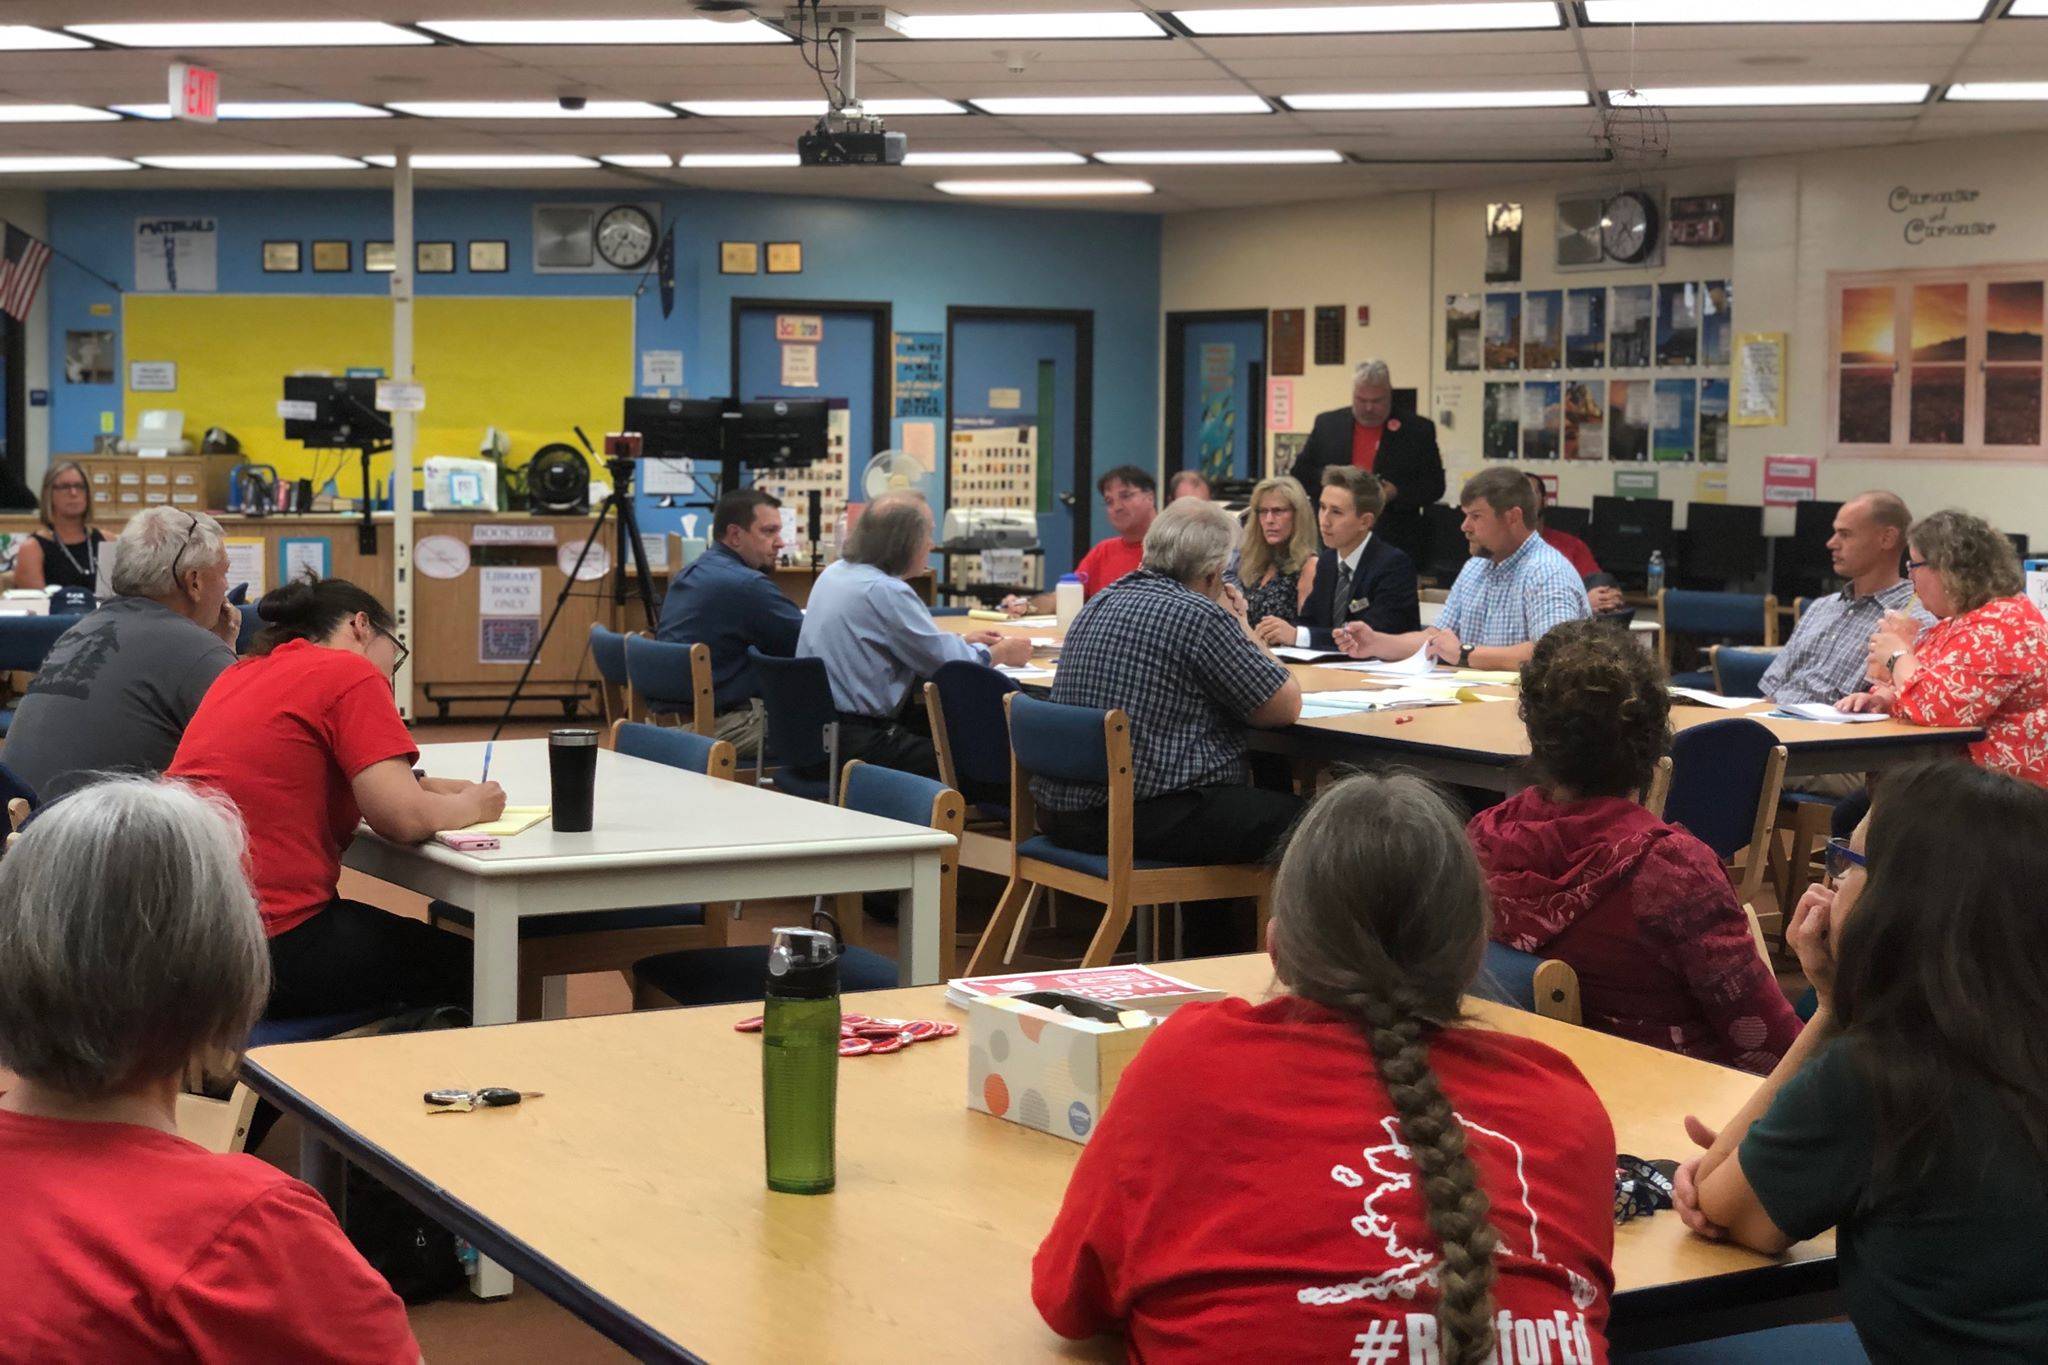 About 75 educators and employees from the Kenai Peninsula Borough School District listen as two employee associations and the district negotiate for a new contract, on Tuesday, Aug. 27, 2019, at the Soldotna High School Library in Soldotna, Alaska. (Photo by Victoria Petersen/Peninsula Clarion)